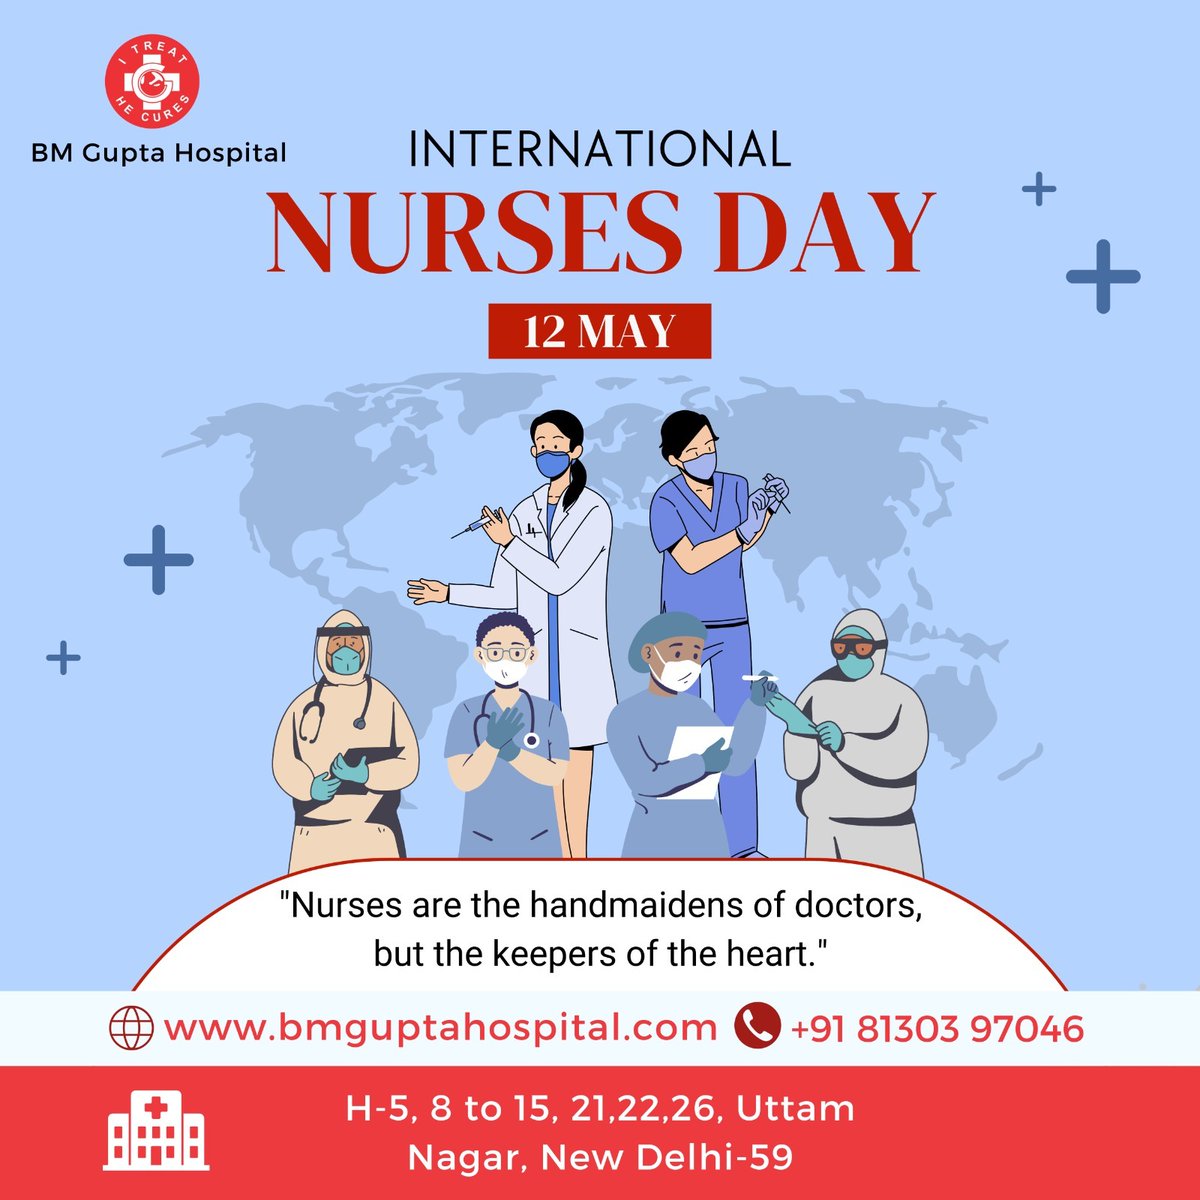 International Nurses Day
Your dedication to your patients does not go unnoticed. You bring so many so much comfort with your excellent care.

#InternationalNursesDay #ThankYouNurses #NursesRock #WeSaluteYou #NurseDay #NurseLife #NursingStrong #NurseHeroes #HealthcareHeroes